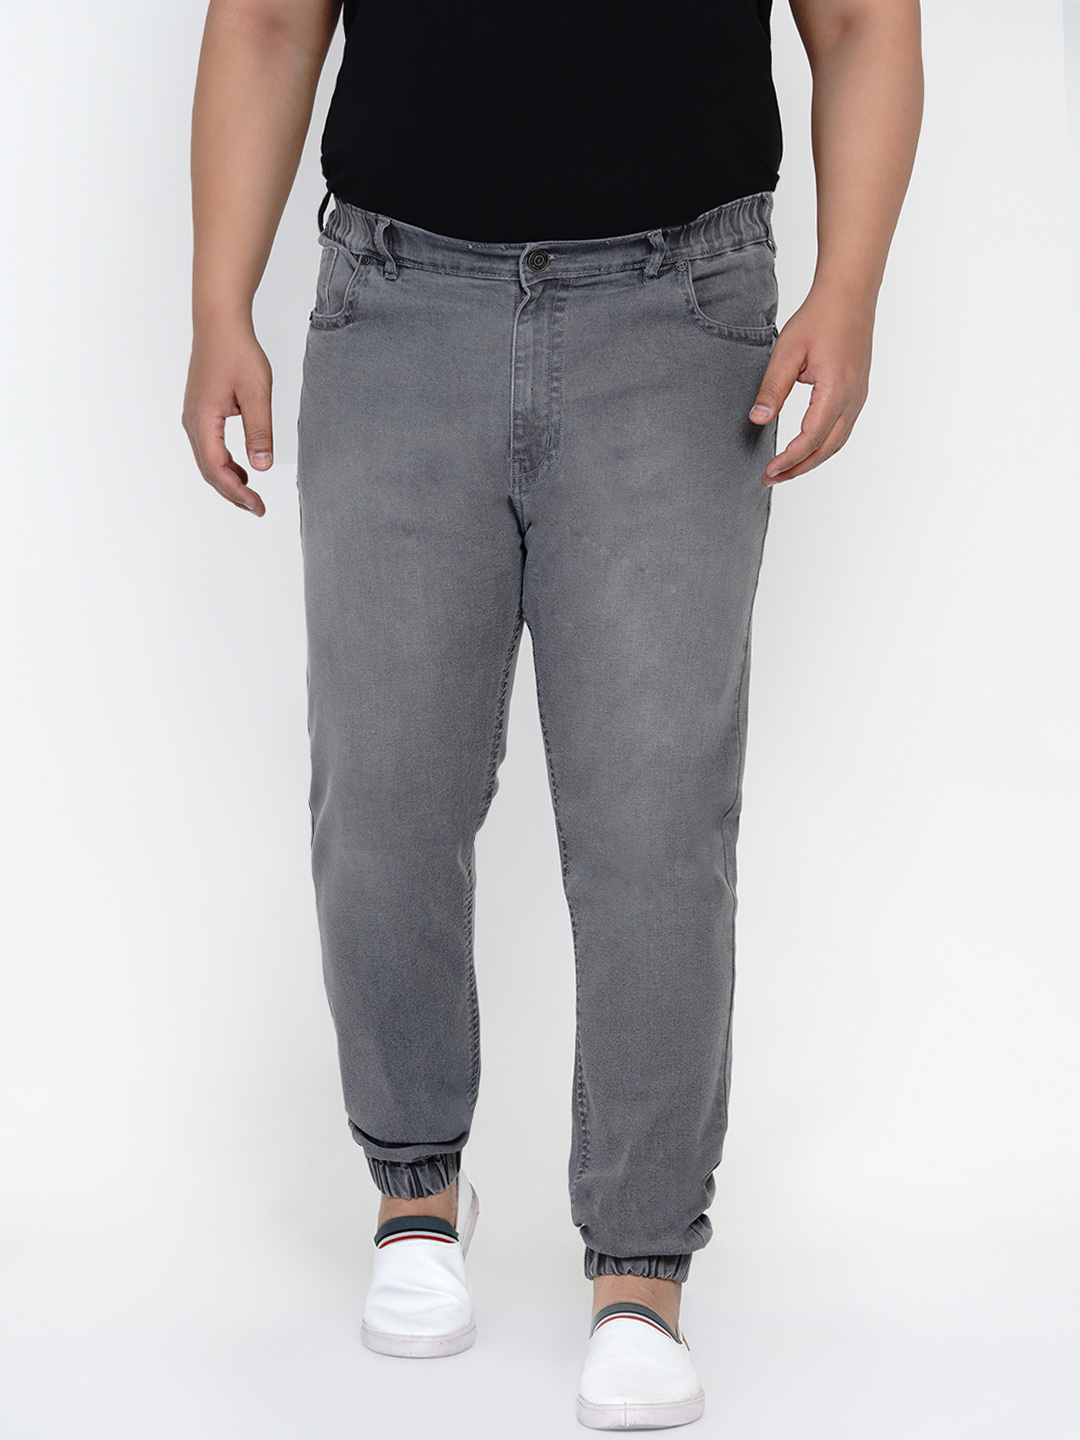 Fossil Gray Joggers